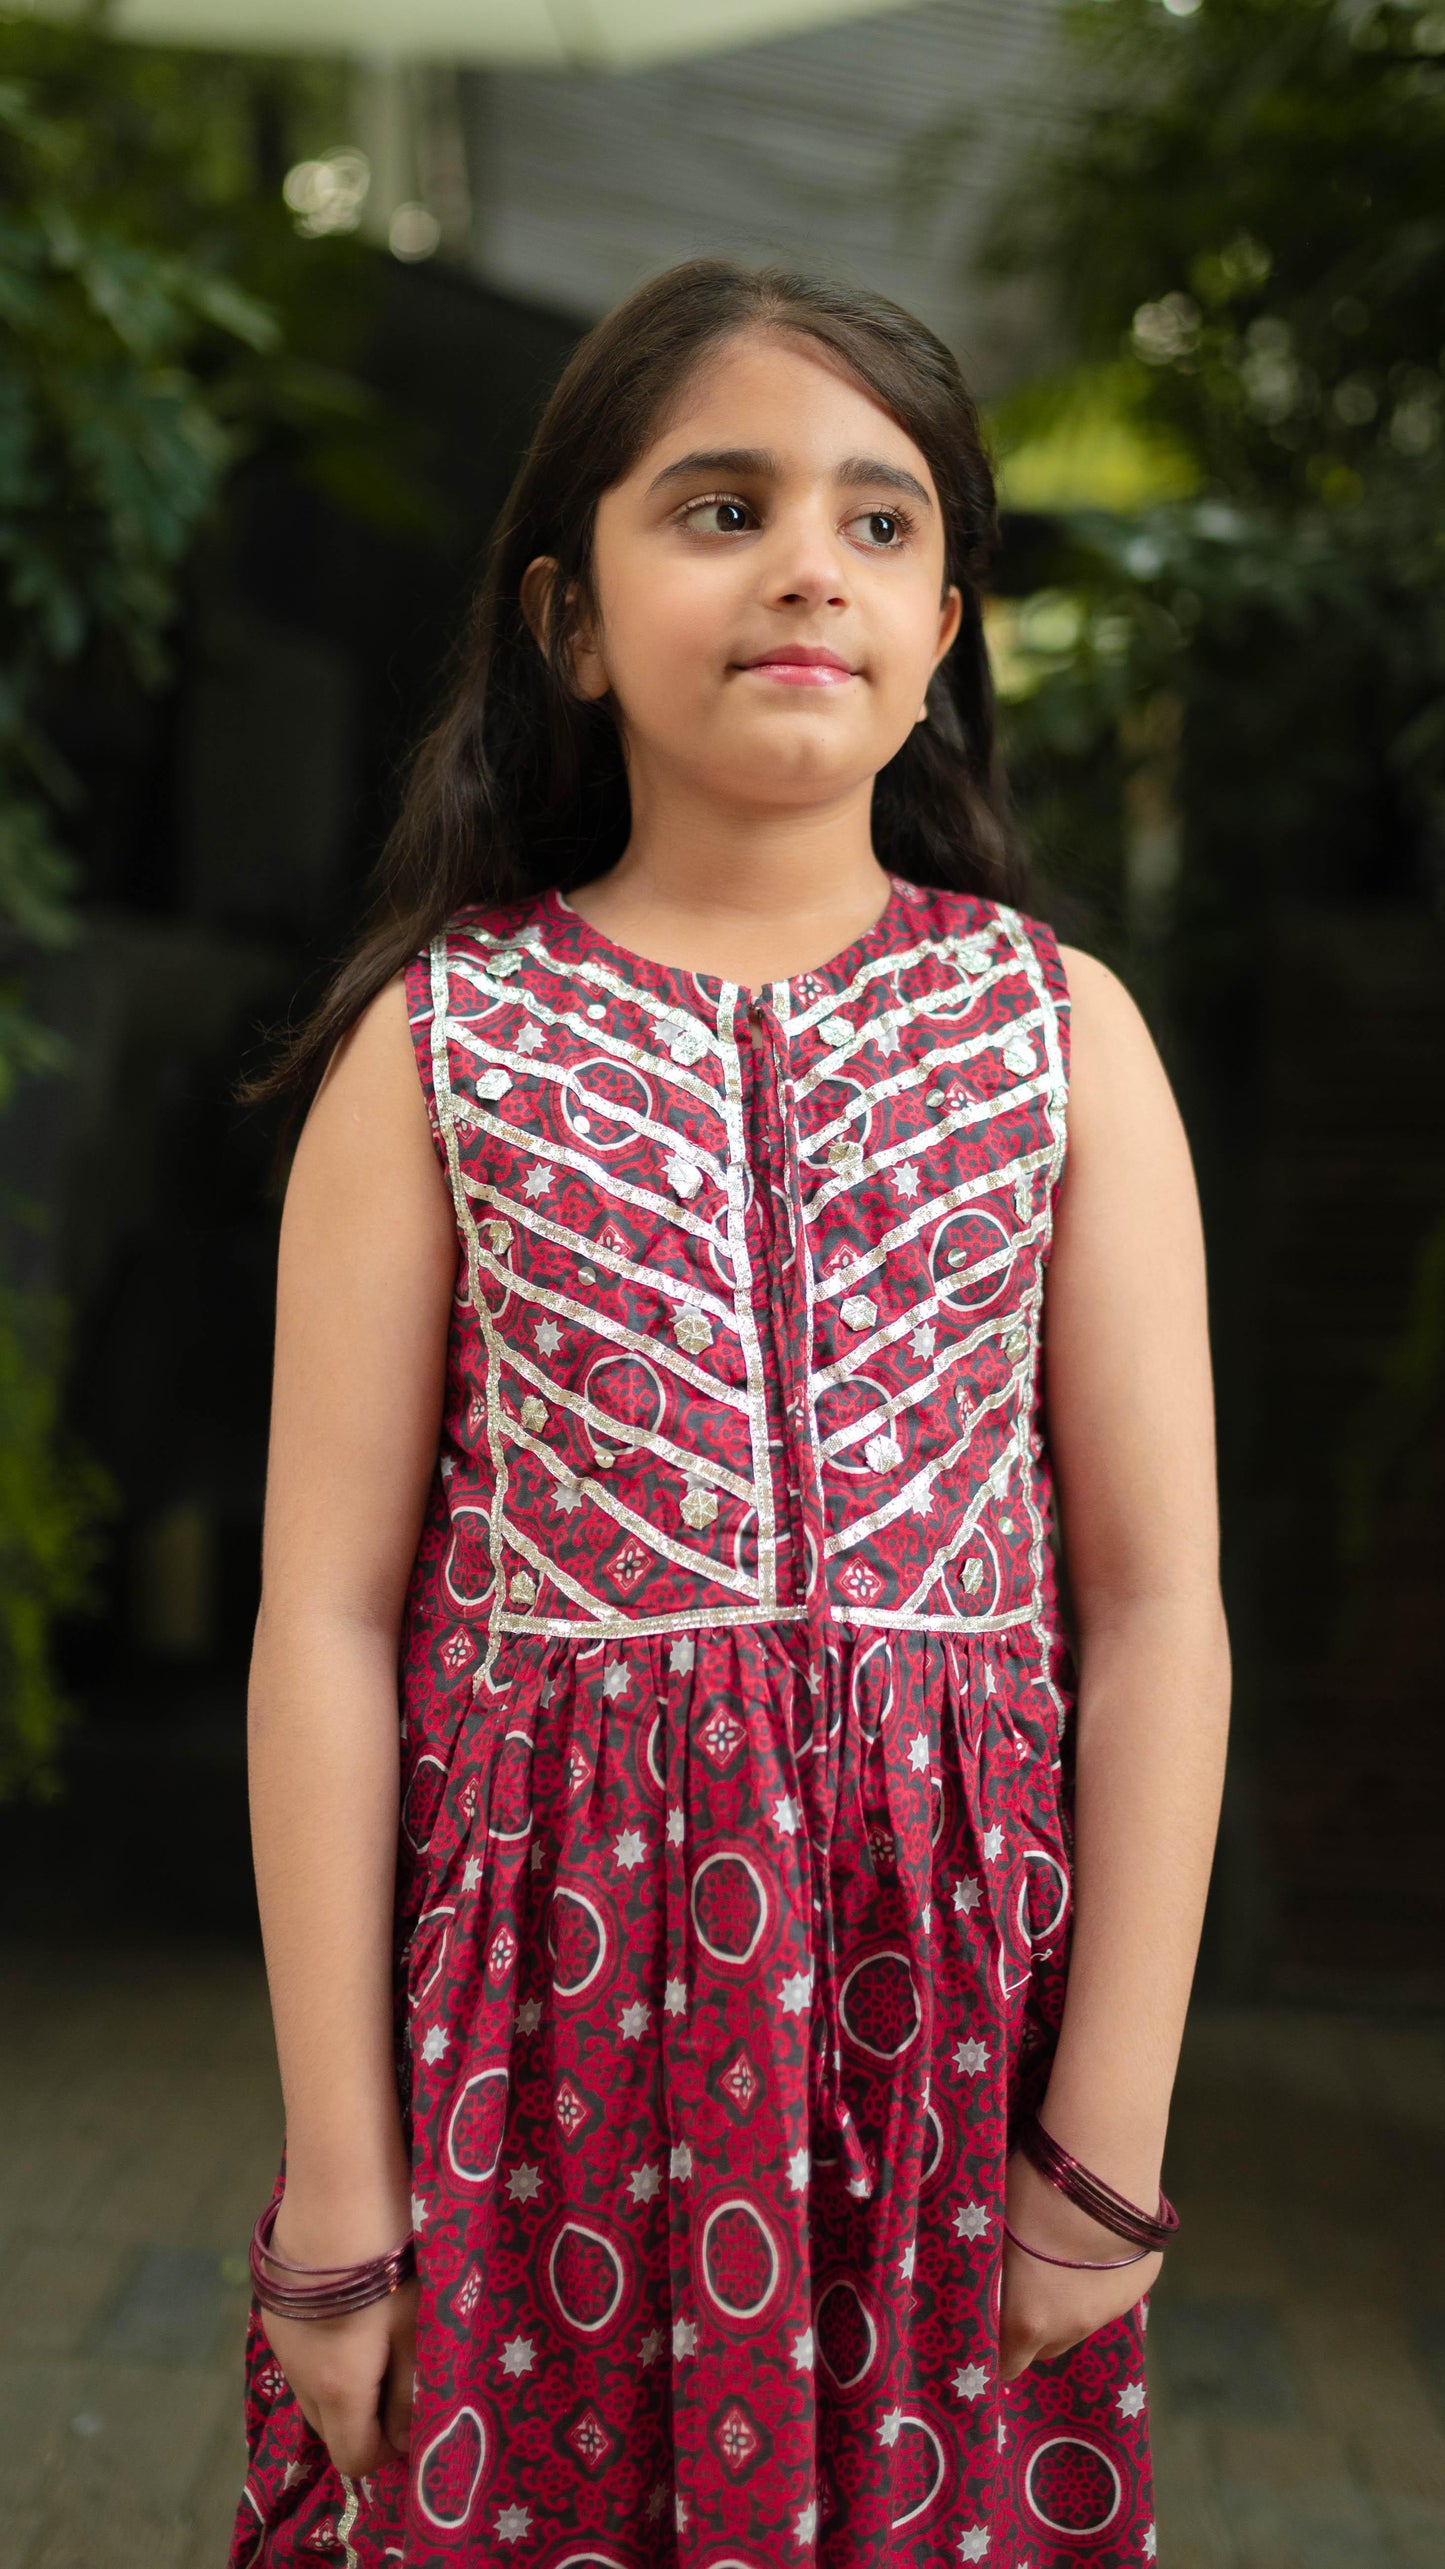 Ajrak traditional gotta lace maroon frock trouser cotton baby clothes, baby girl clothes, boys clothes, boys clothing, children clothes, childrens clothes sale, girls clothing, kids clothes, kids clothes online, kids clothing, kids clothing stores, kids shopping, online shopping, women clothing kids shopping at best price in Pakistan with express shipping at your doorstep.